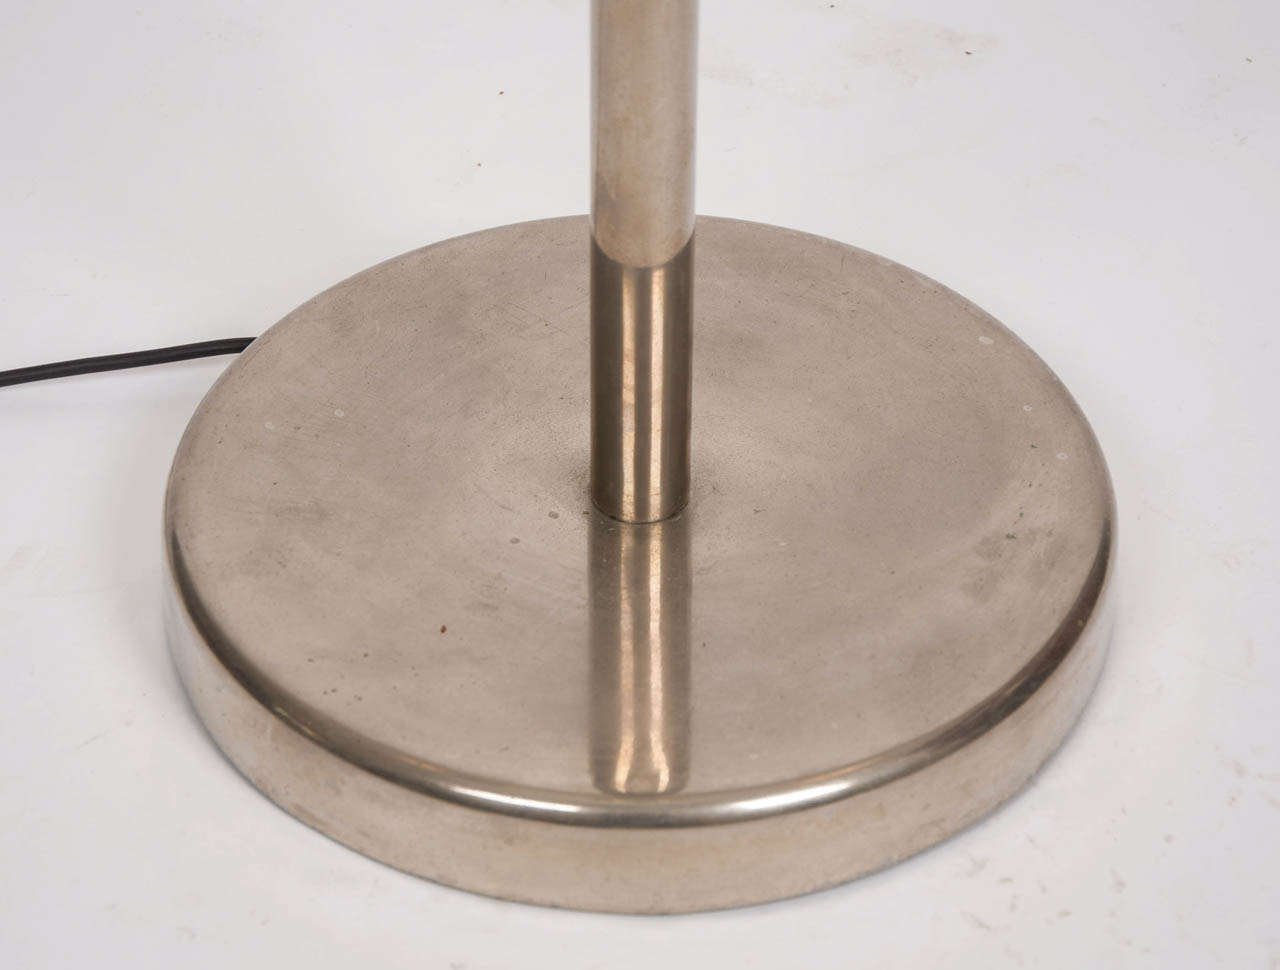 Nickel Floor Lamp In Excellent Condition For Sale In London, GB